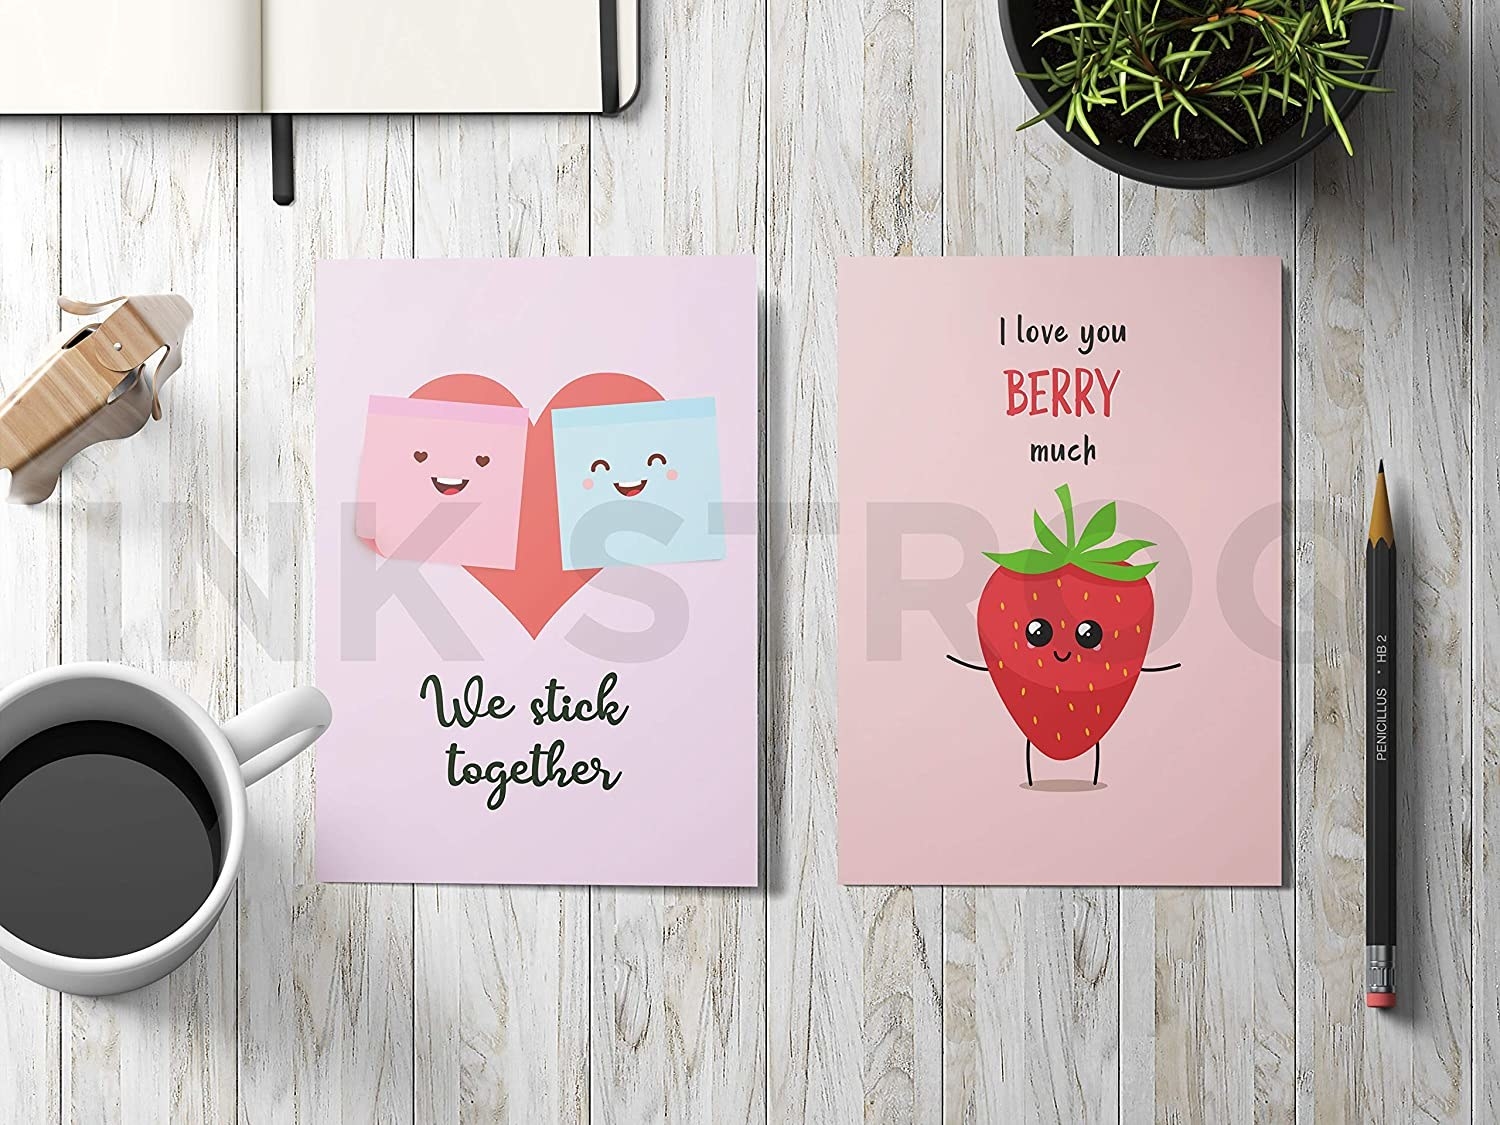 A wooden desk with a coffee mug, journal, plant, and two pink postcards on it. One has a drawing of sticky notes and says, &quot;We stick together&quot;. The other one has a drawing of a strawberry and says, &quot;I love you berry much&quot;.